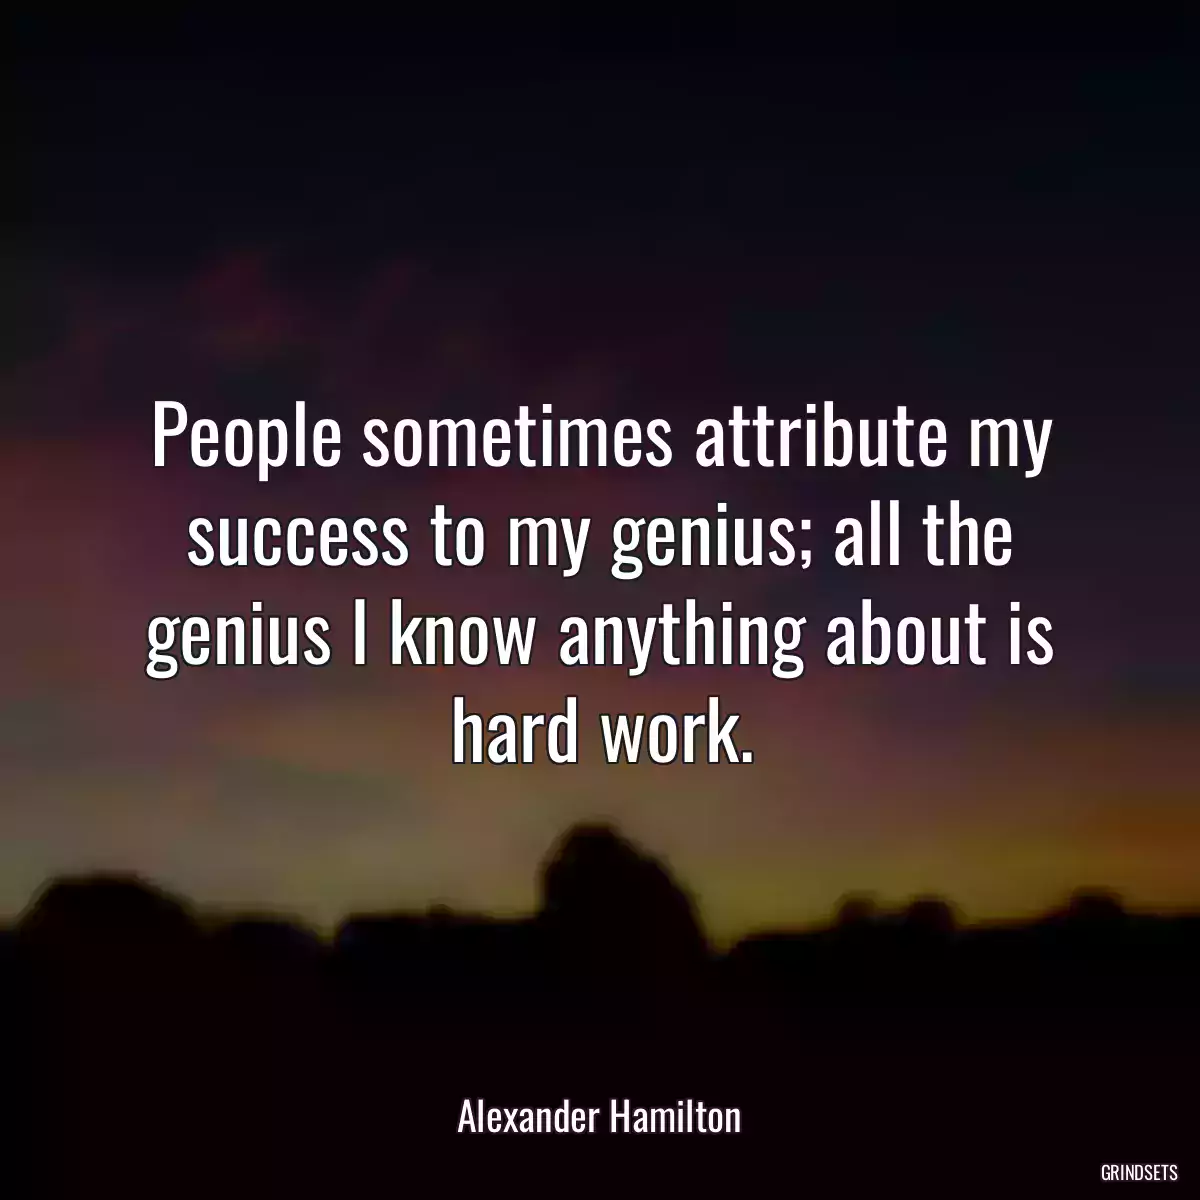 People sometimes attribute my success to my genius; all the genius I know anything about is hard work.